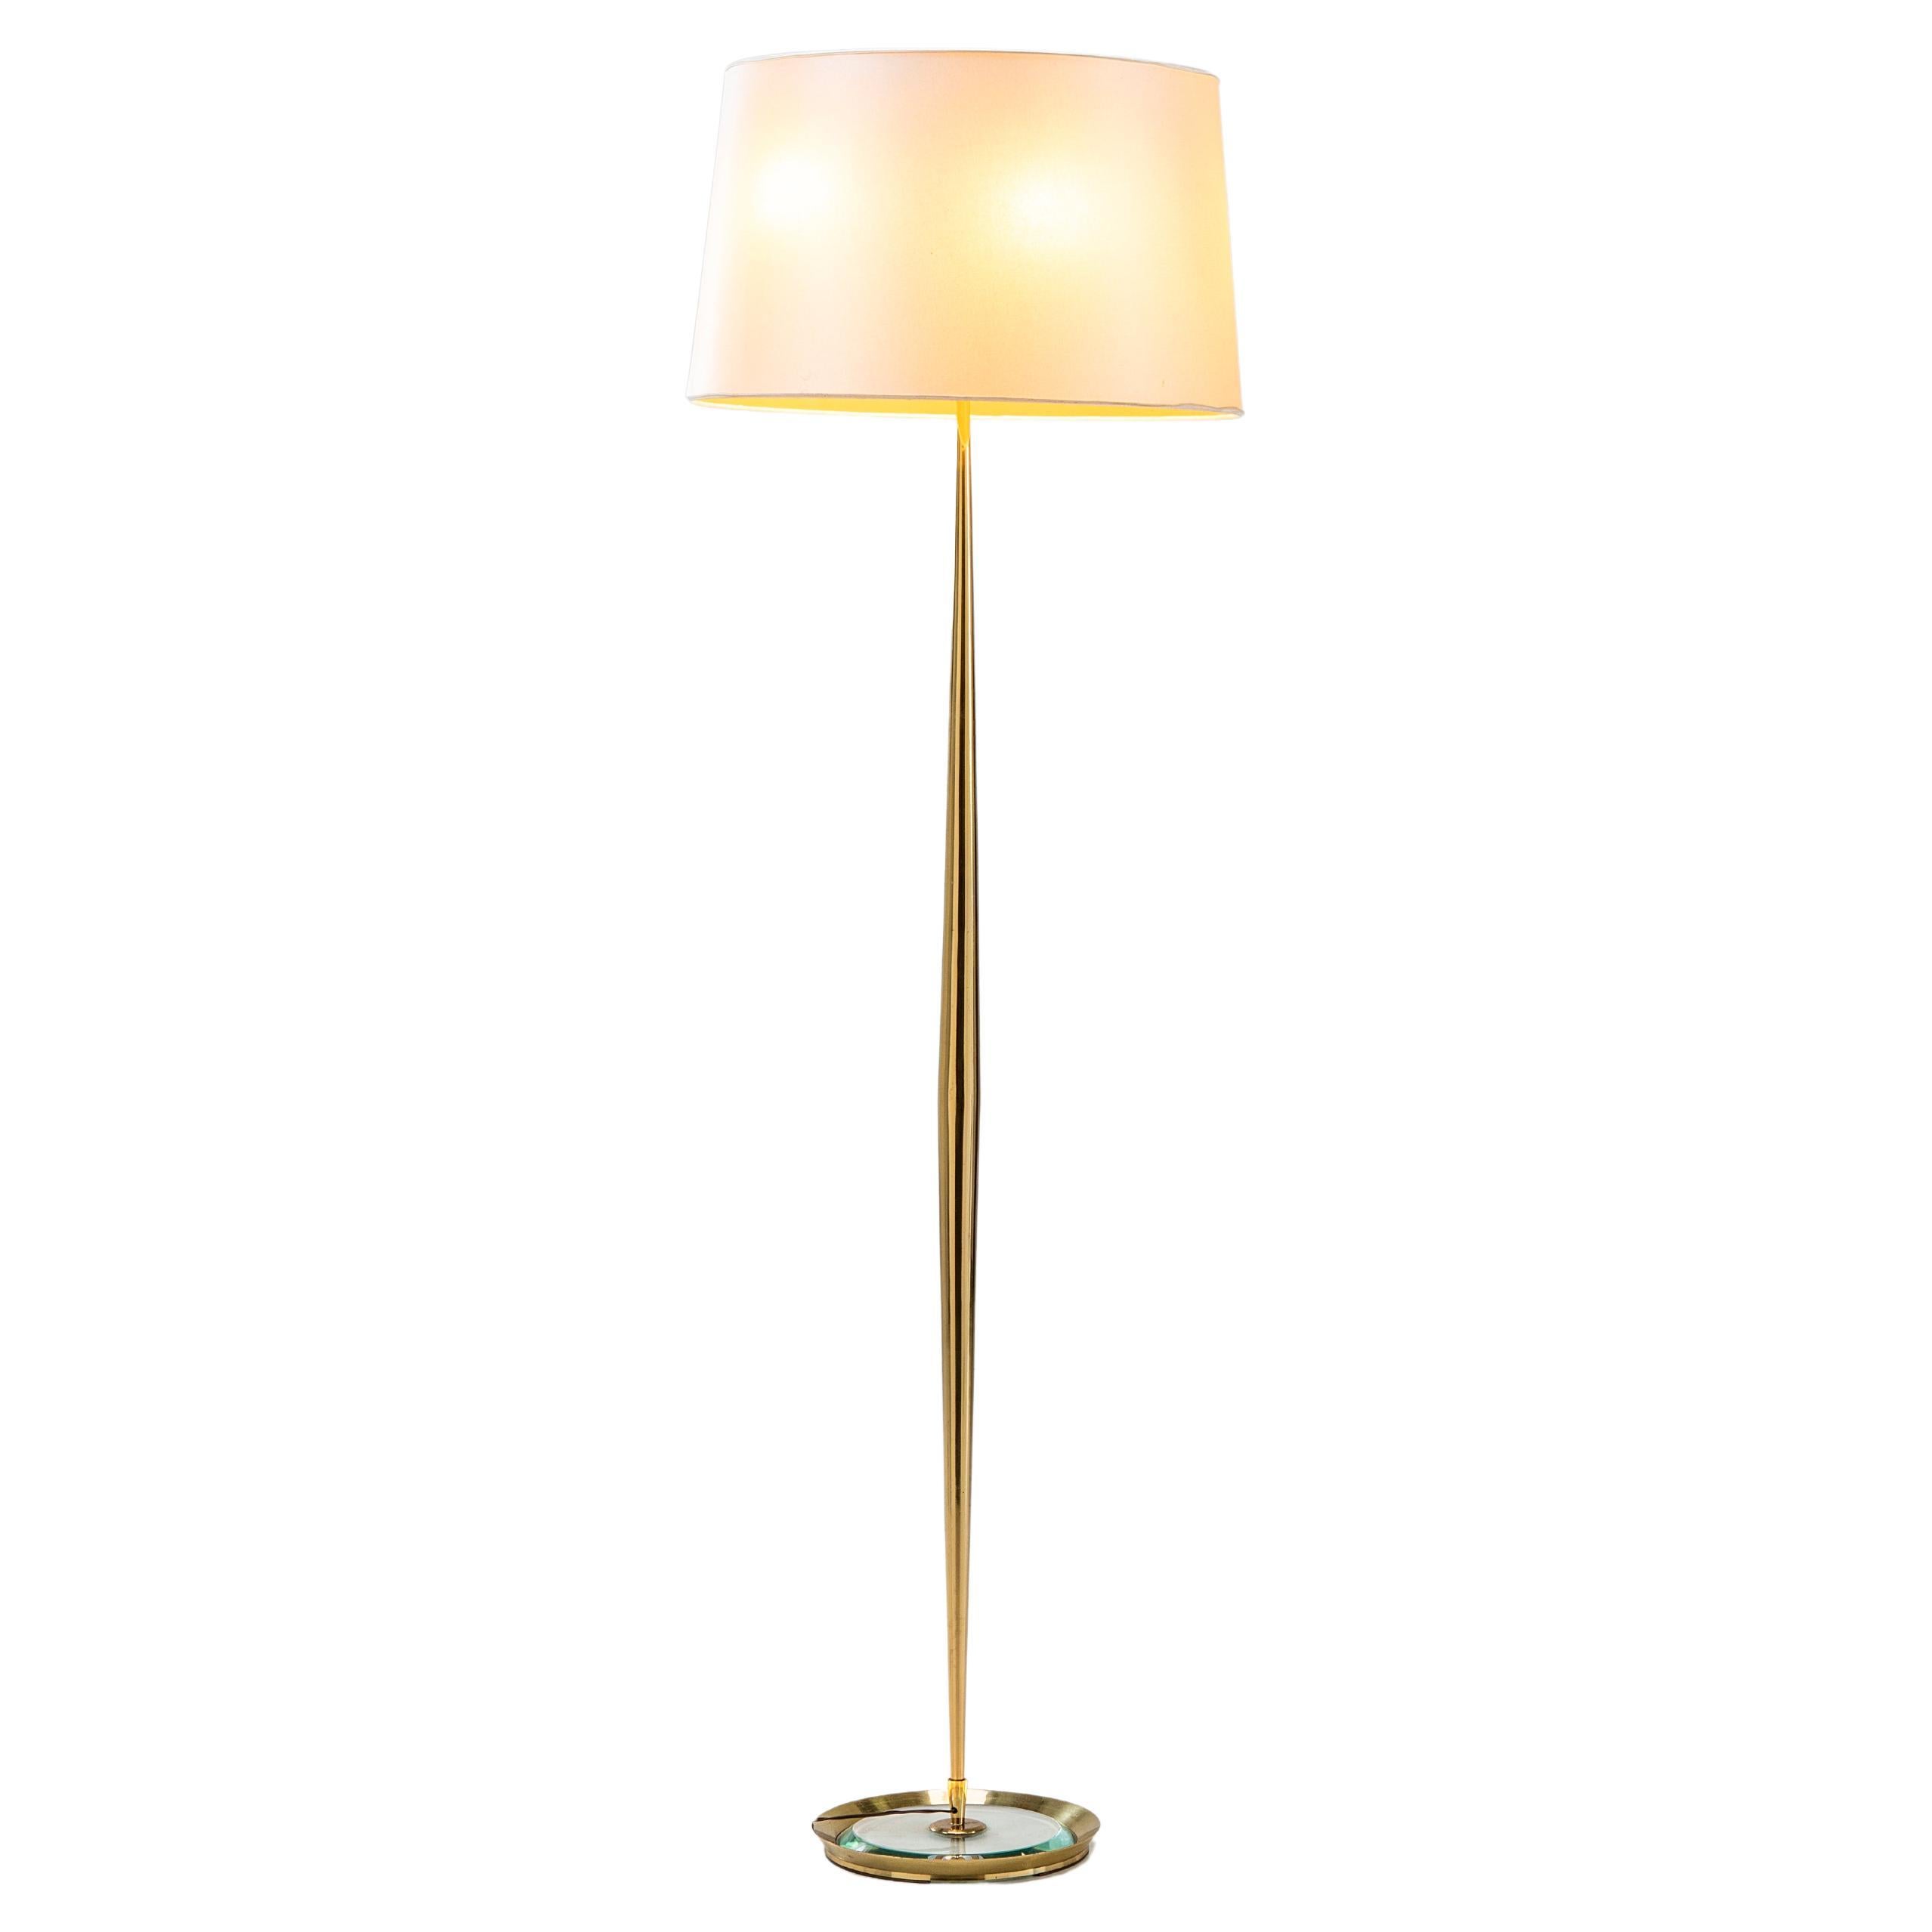 Max Ingrand Variant mod 1692 Brass floor lamp with crystal base Fontana Arte 60s For Sale